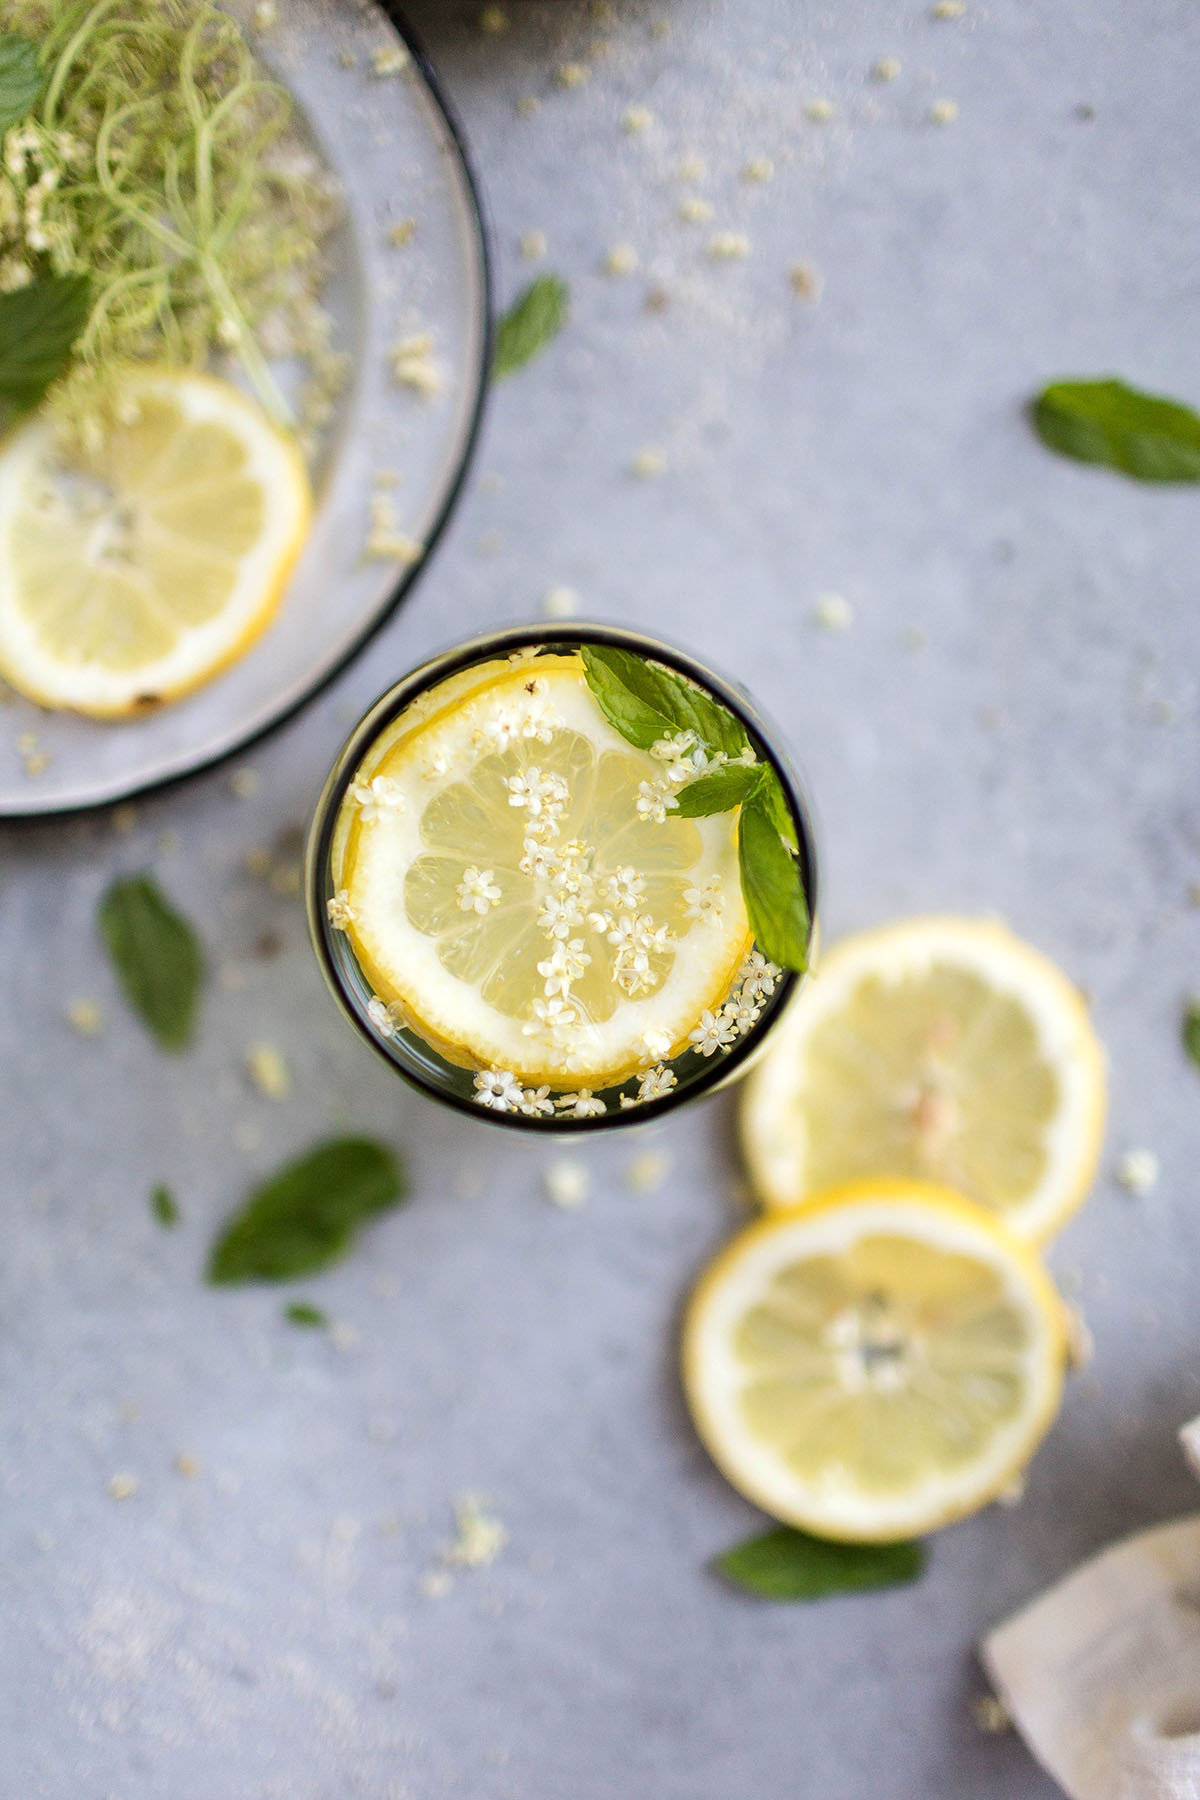 10 Drink and Cocktail Recipes To Keep You Cool This Summer!